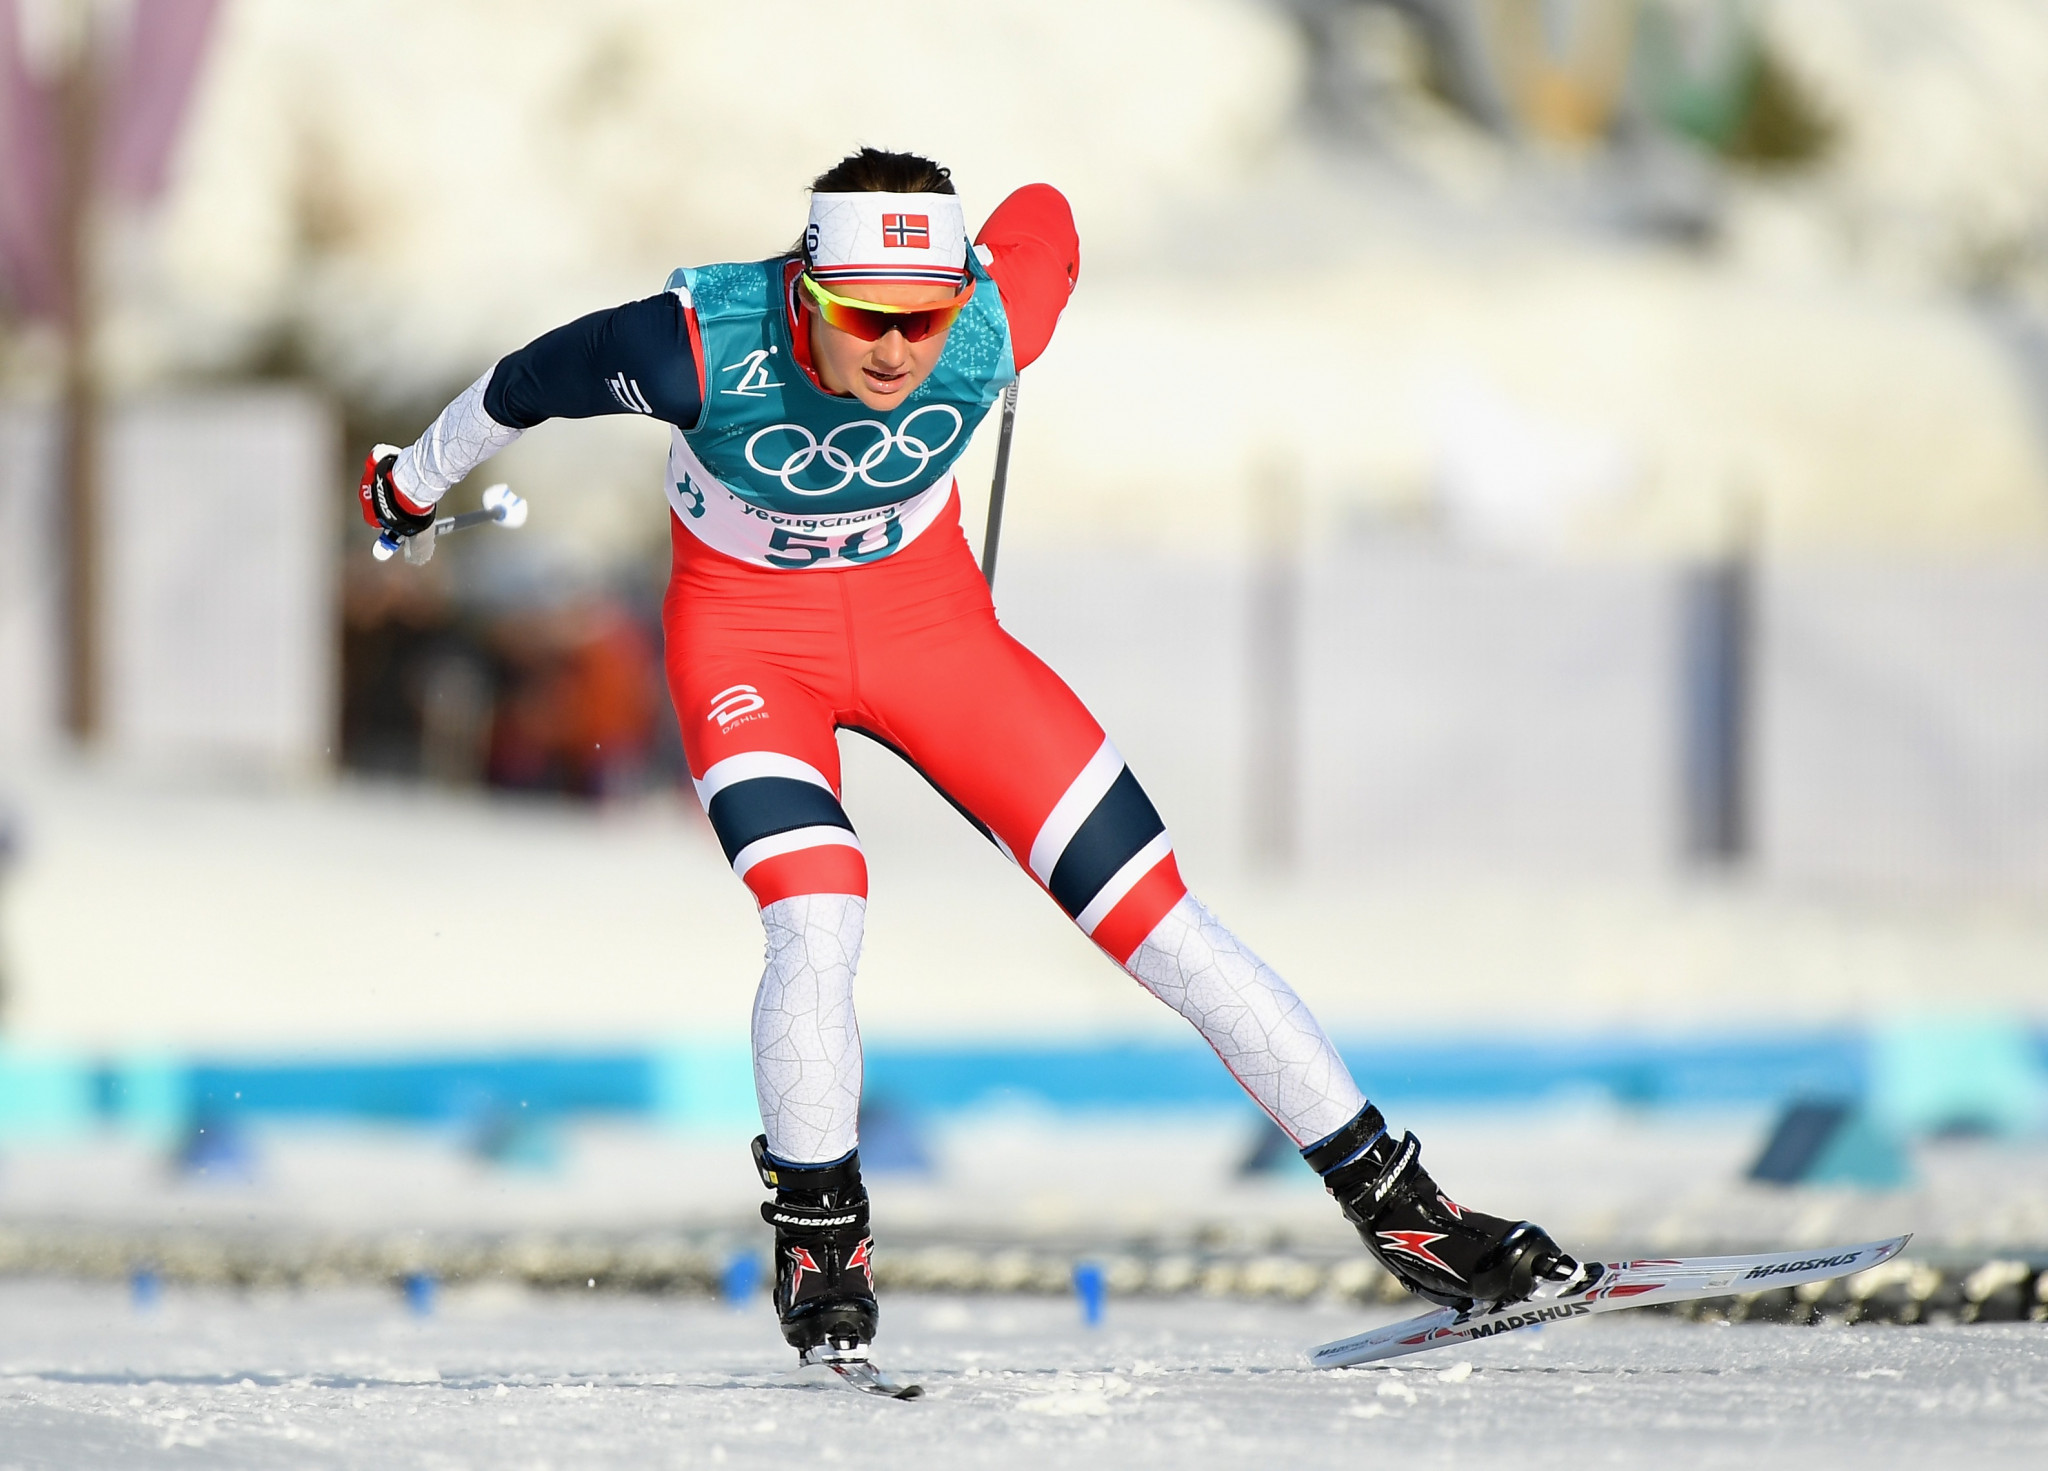 Three-time Olympic medallist Ingvild Flugstad Østberg returned to World Cup action last month after struggling to meet the NSF's health criteria ©Getty Images